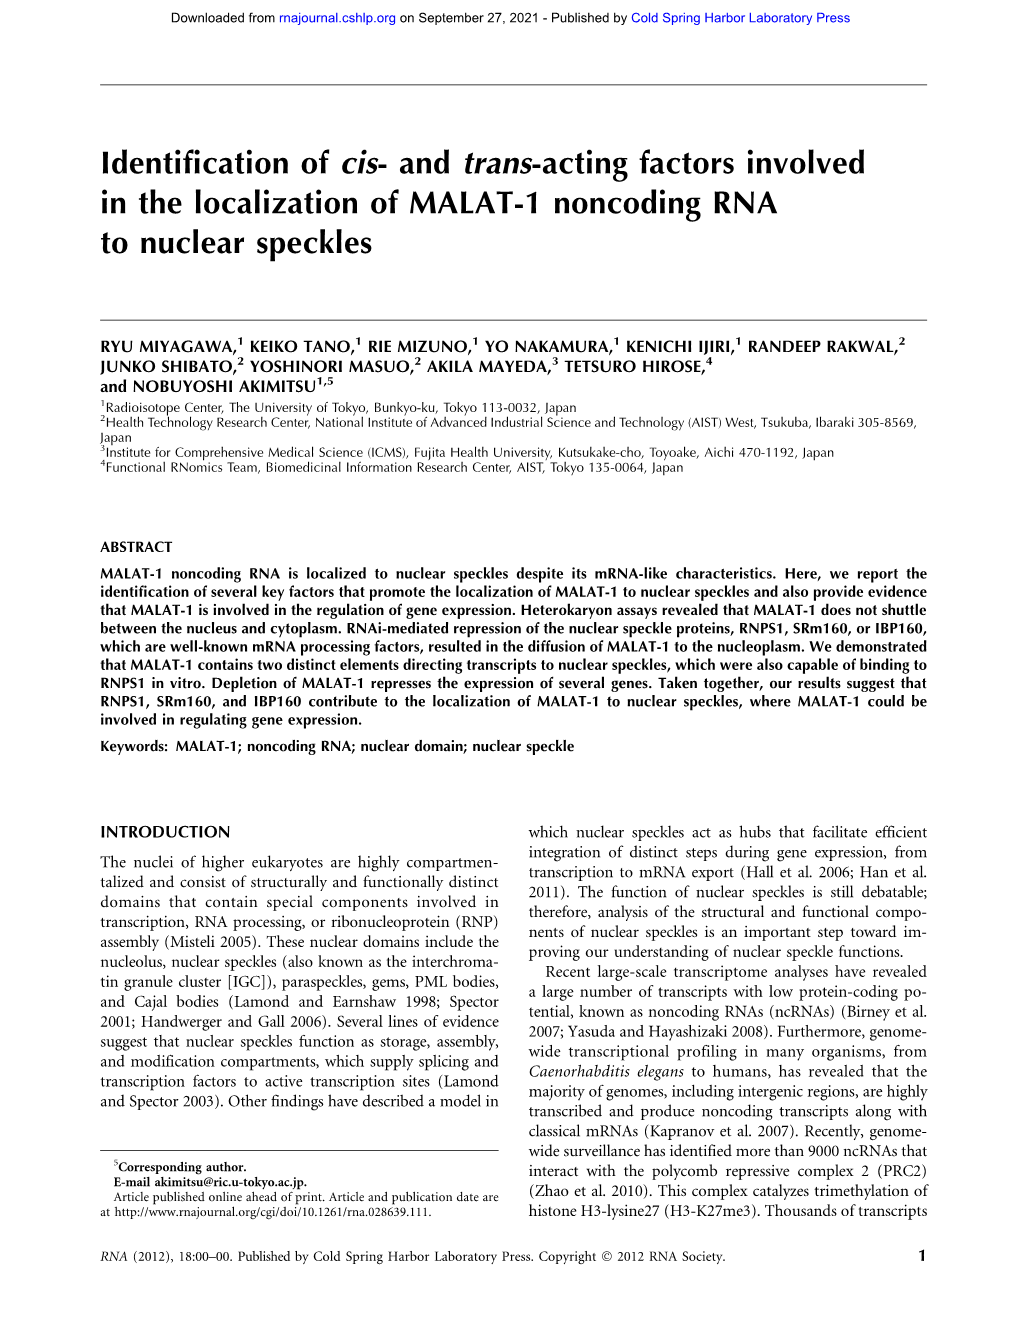 Identification of Cis- and Trans-Acting Factors Involved in the Localization of MALAT-1 Noncoding RNA to Nuclear Speckles